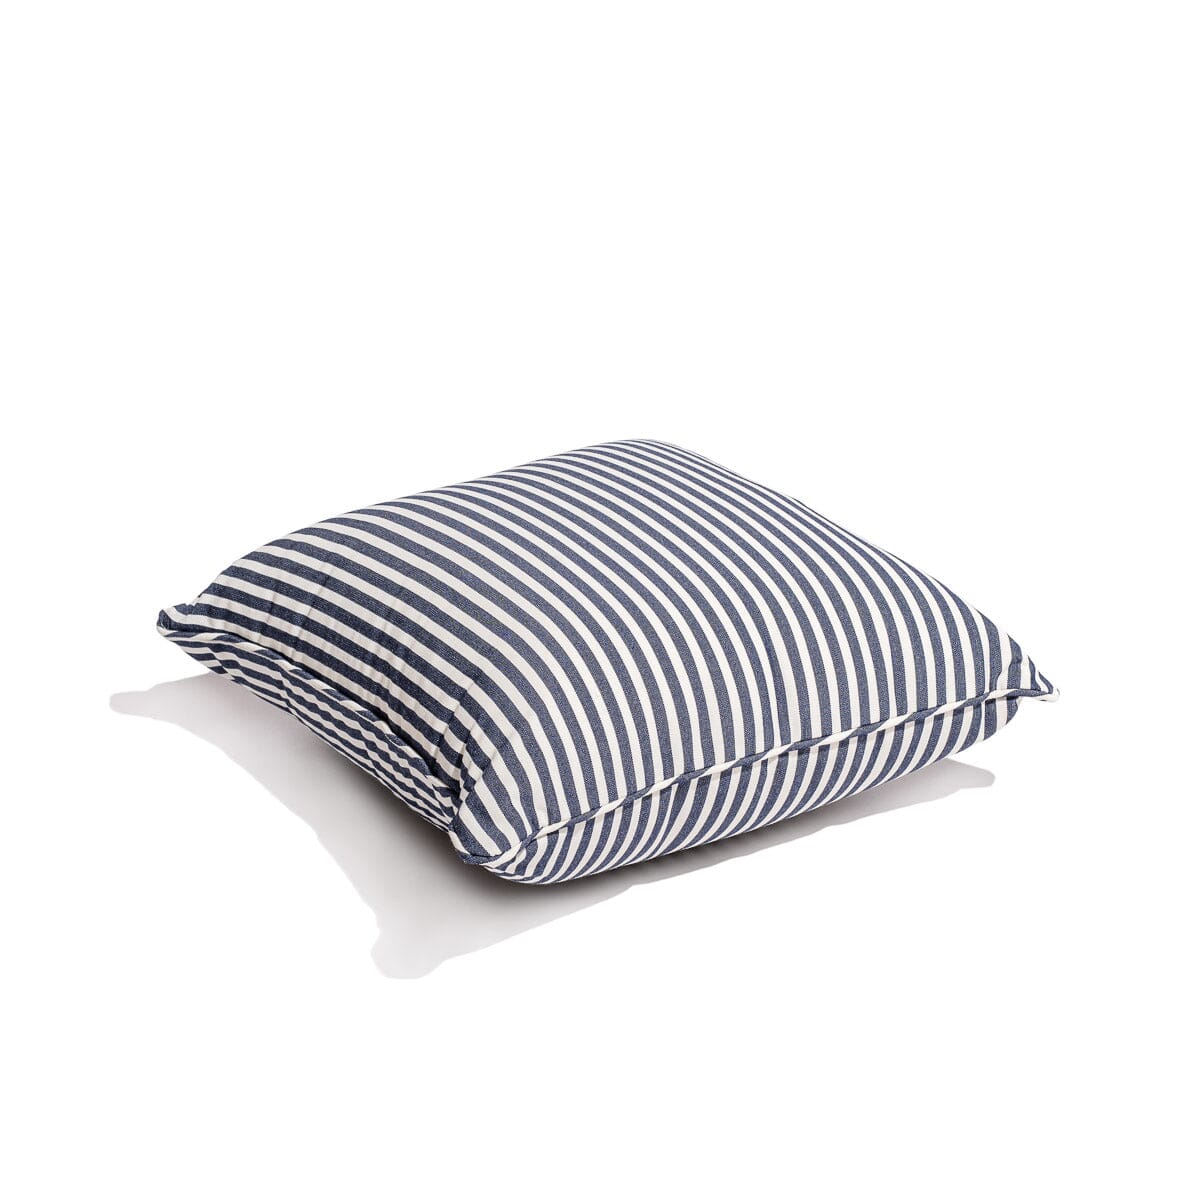 The Small Square Throw Pillow - Lauren's Navy Stripe Small Square Throw Pillow Business & Pleasure Co Aus 